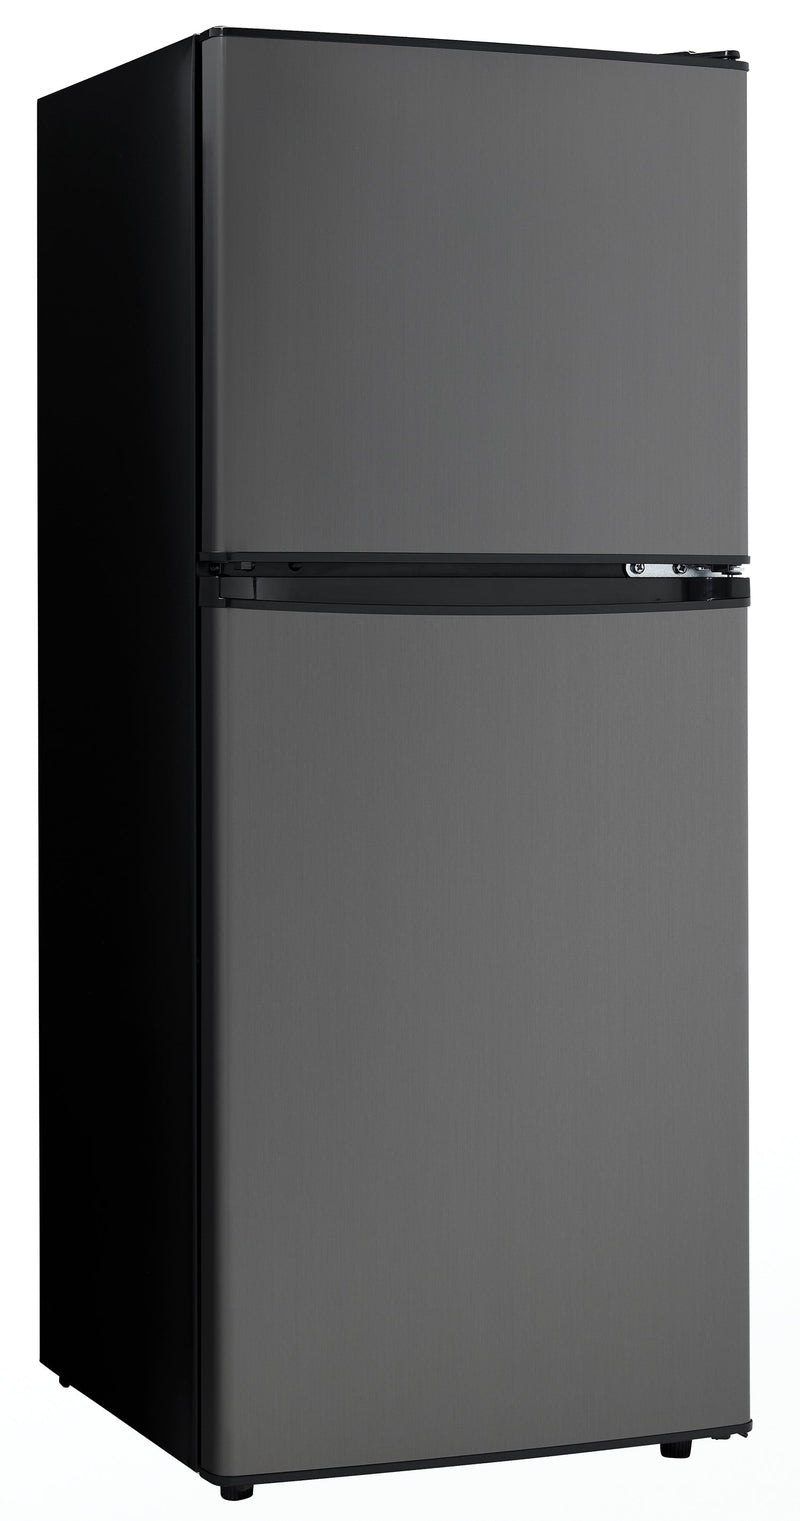 Danby Black Stainless Steel Look Compact Refrigerator (4.7 Cu.Ft.) - DCR047A1BBSL